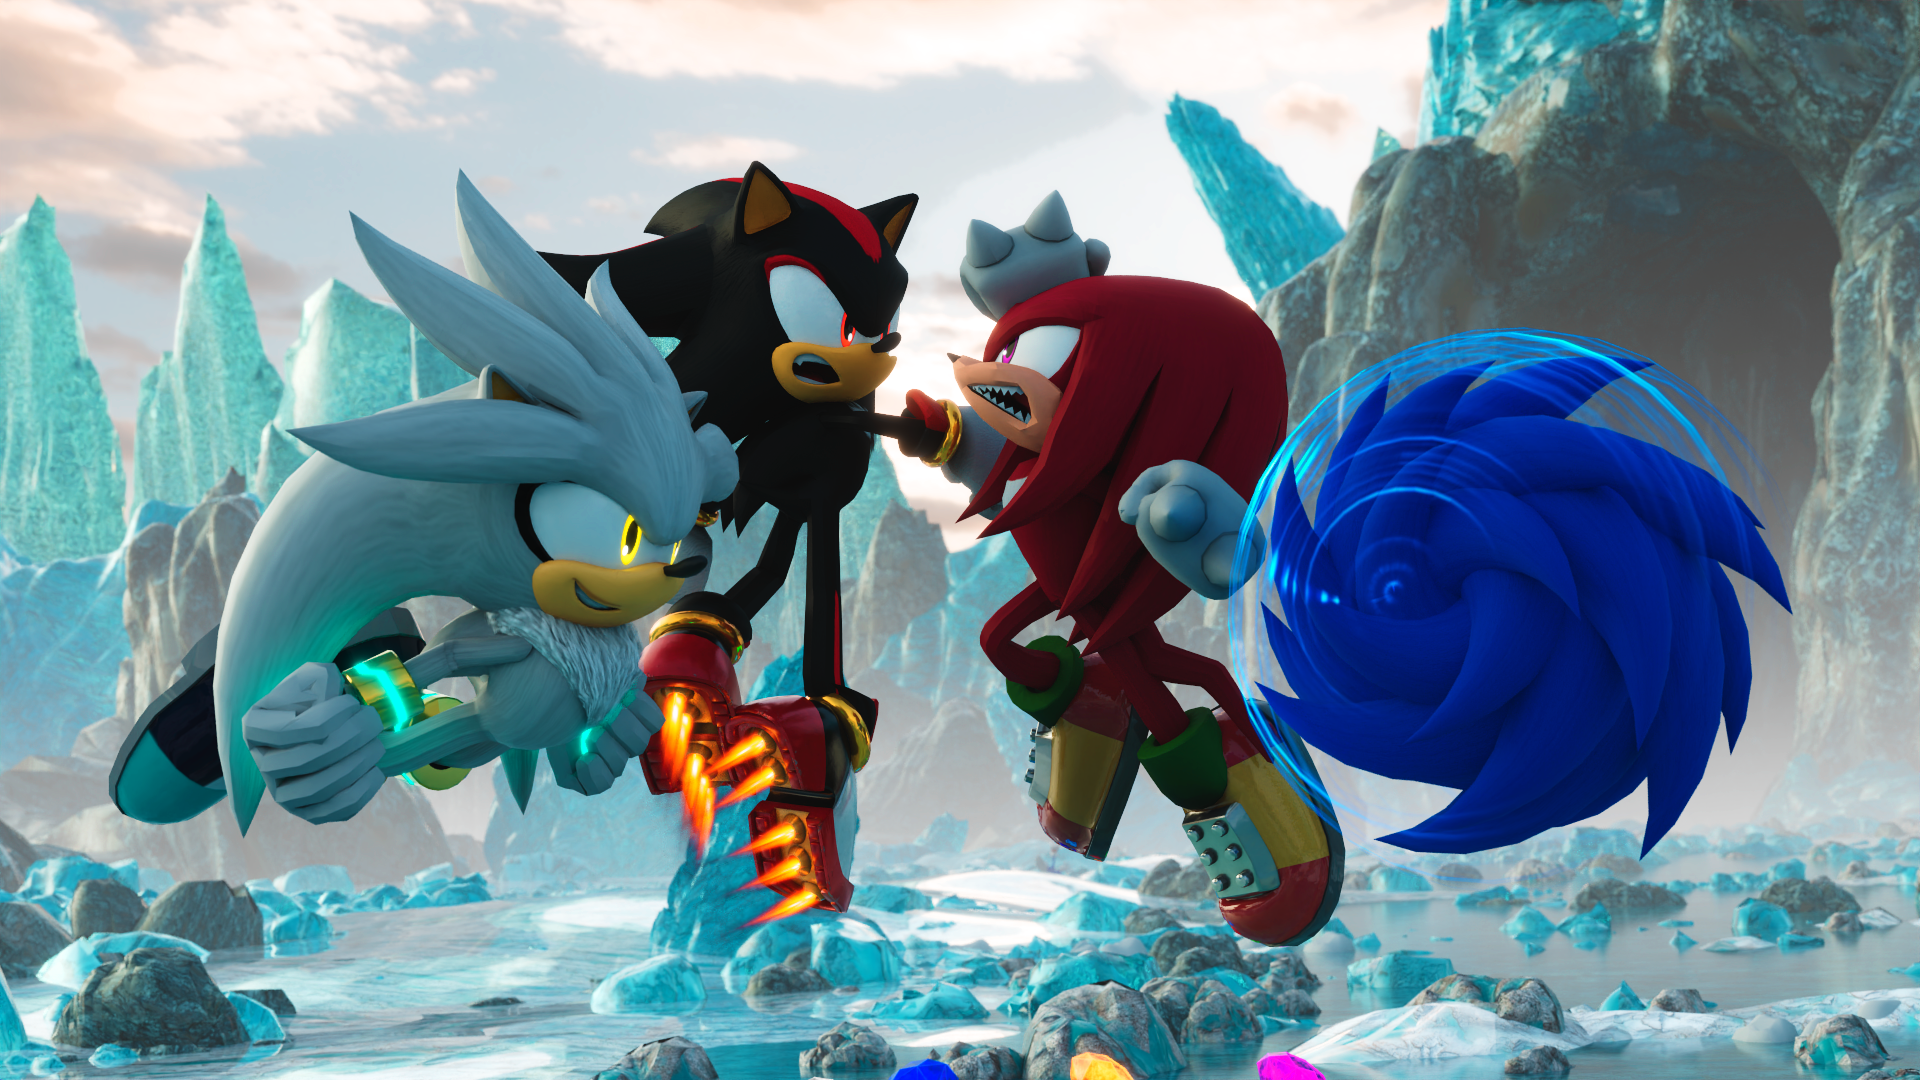 Sonic, Shadow, Knuckles and Silver collage by NinHitFan2000 on DeviantArt